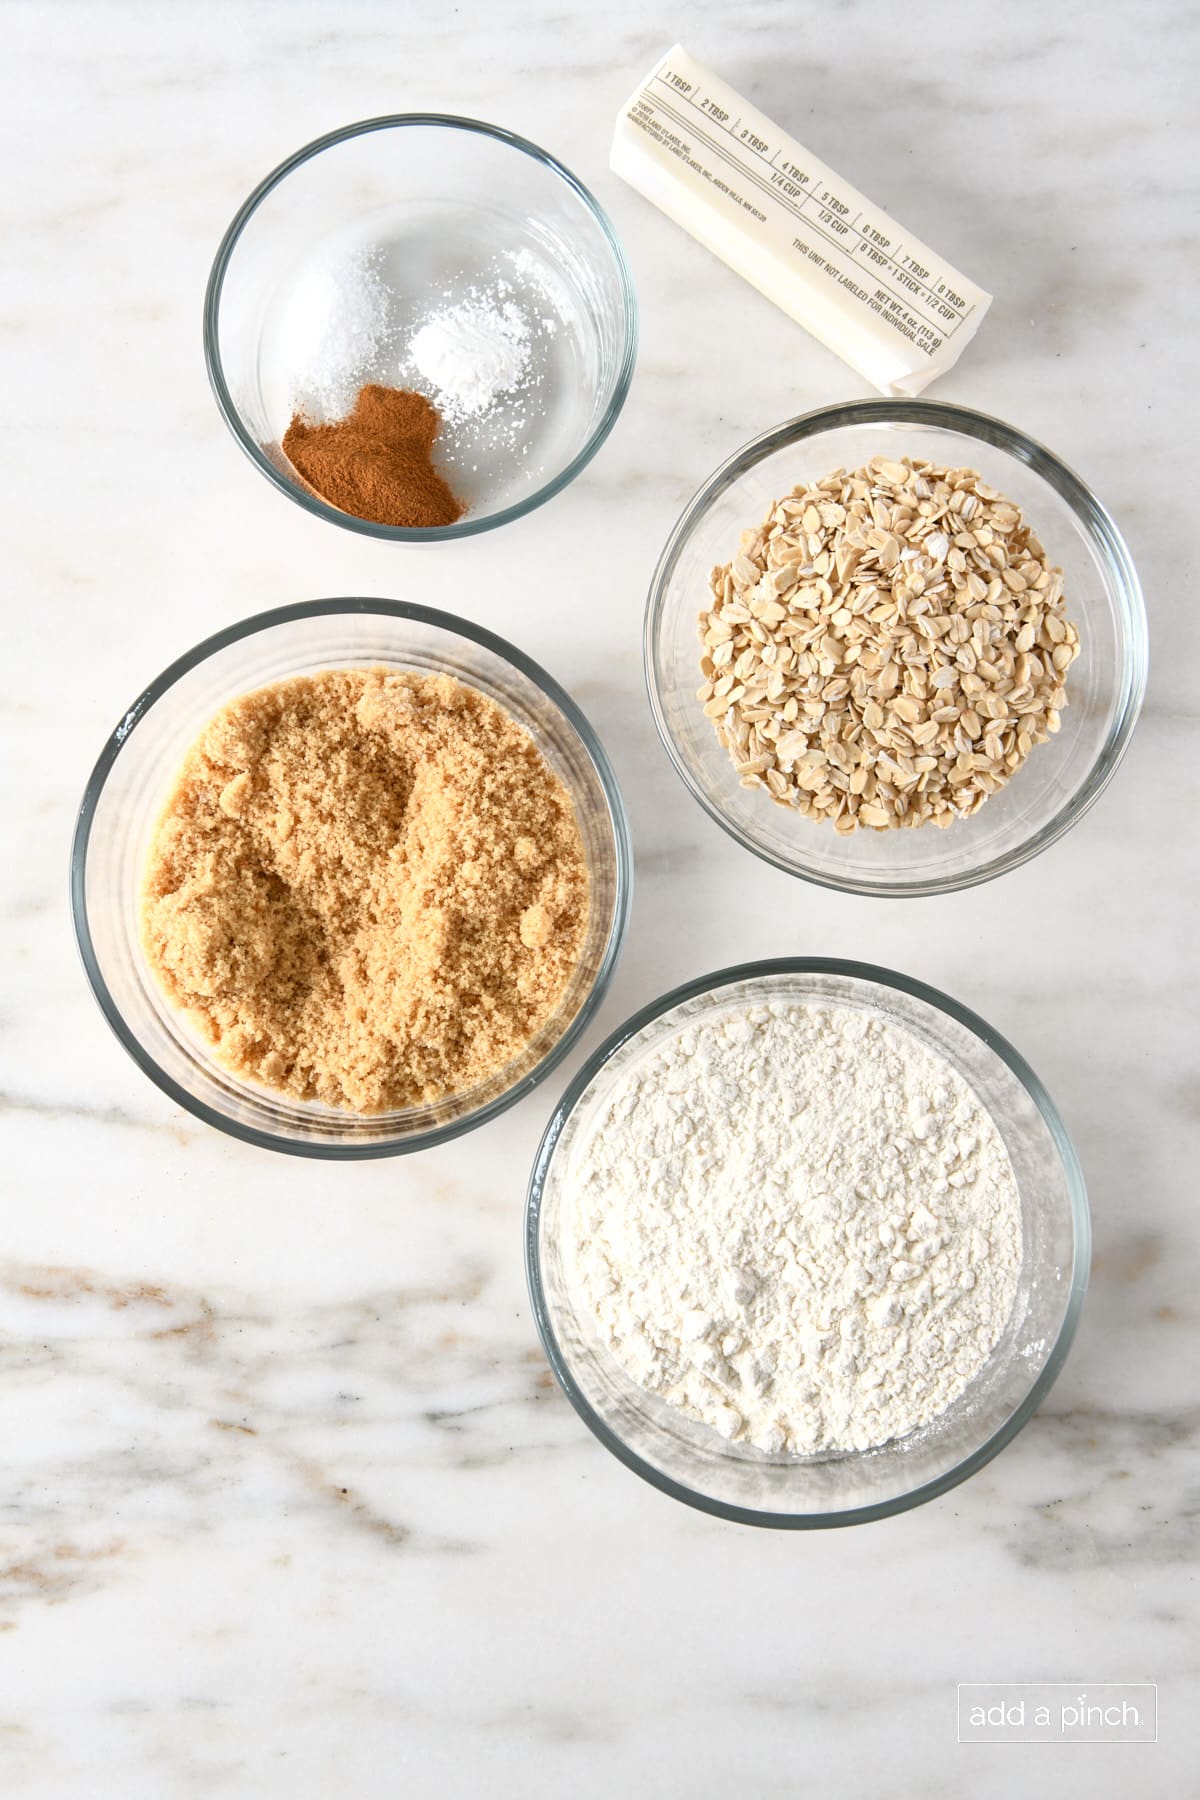 Flour, brown sugar, oats, salt, cinnamon, baking powder in glass bowls and butter on marble counter.